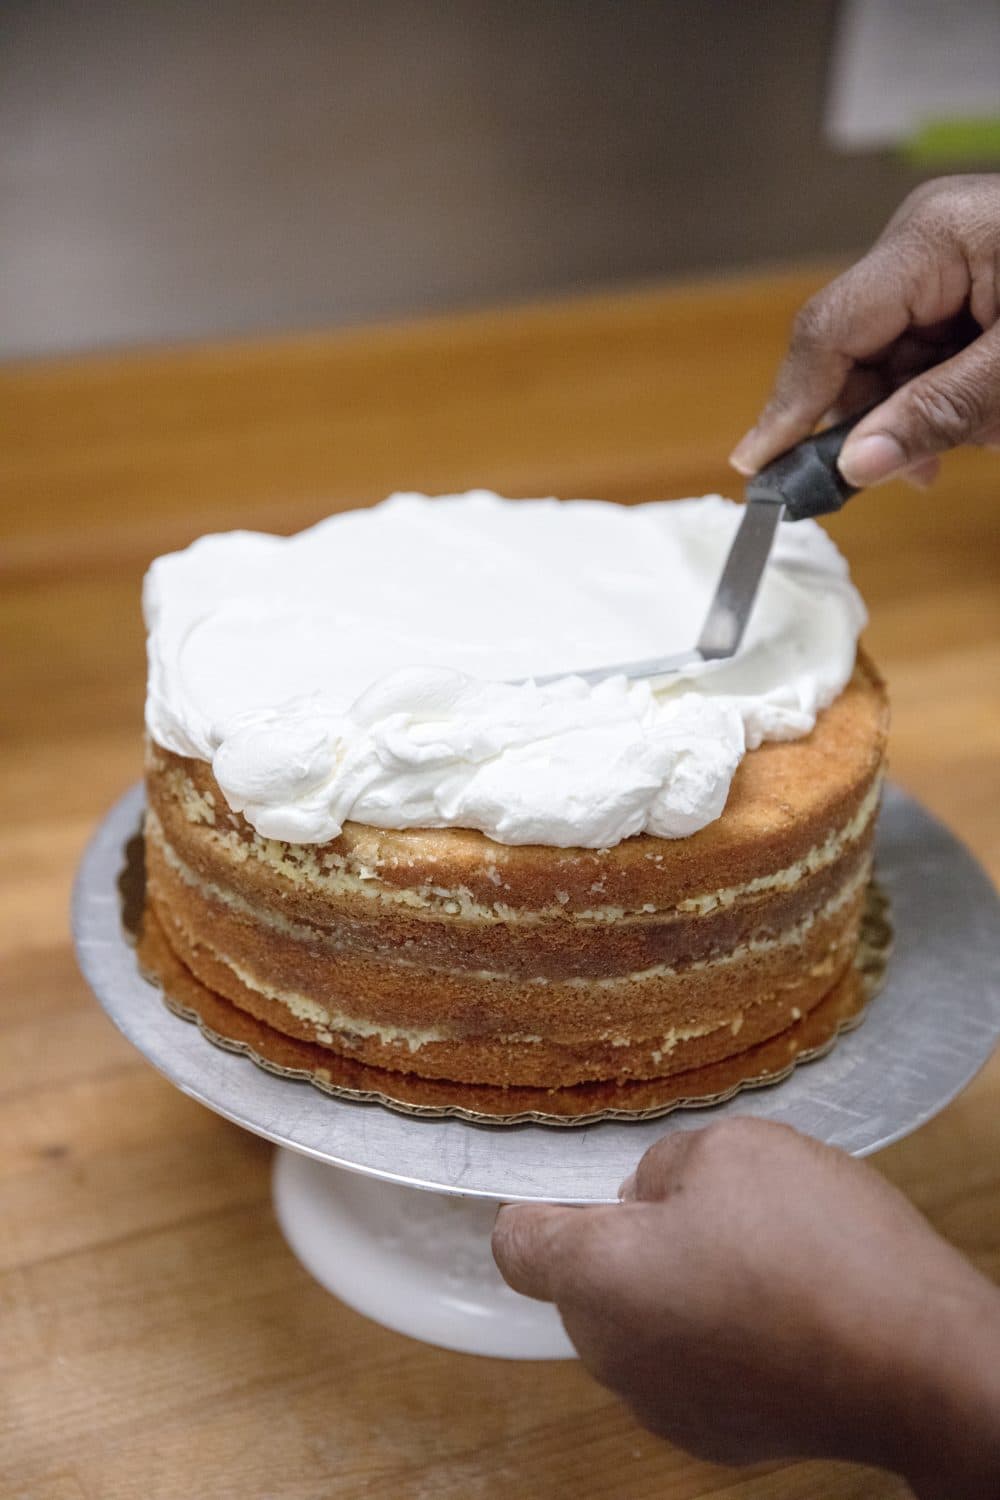 Dolester Miles puts the icing on her coconut pecan cake. (Courtesy Carry Norton)